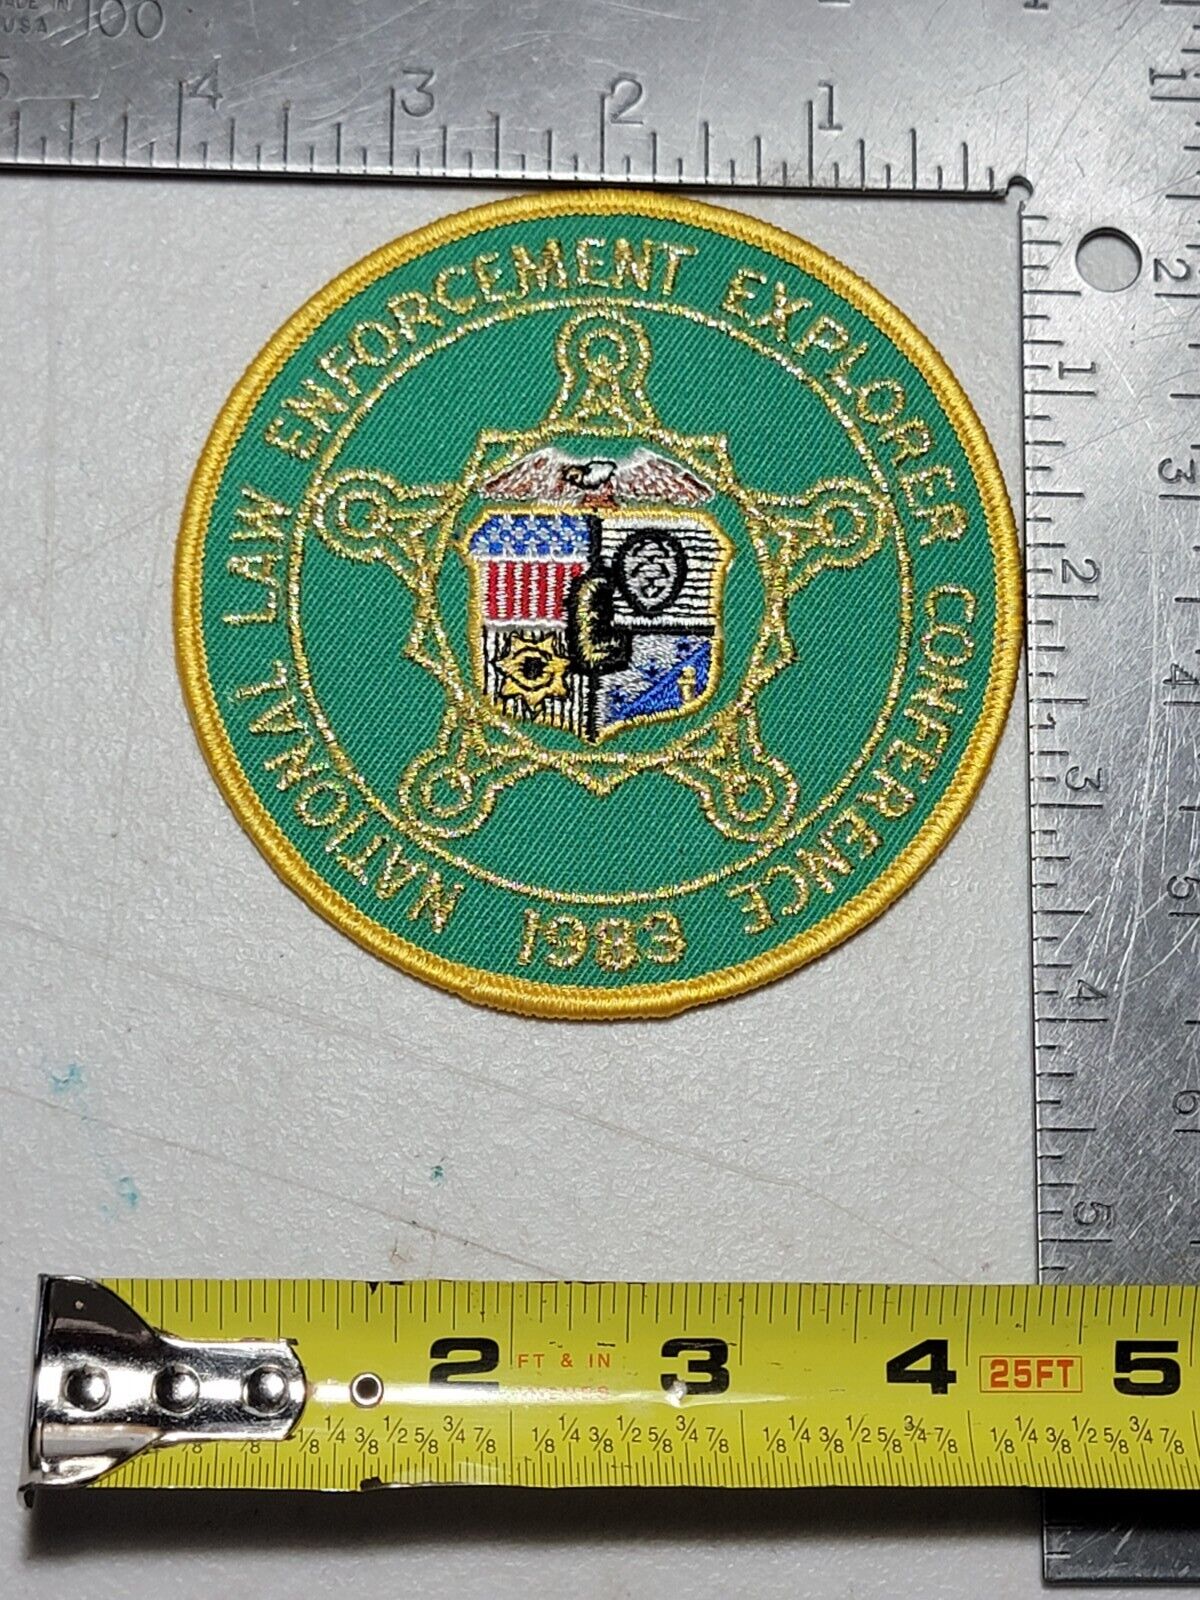 ZZb1 Police patch patches 1983 National Law Enforcement explorer conference 